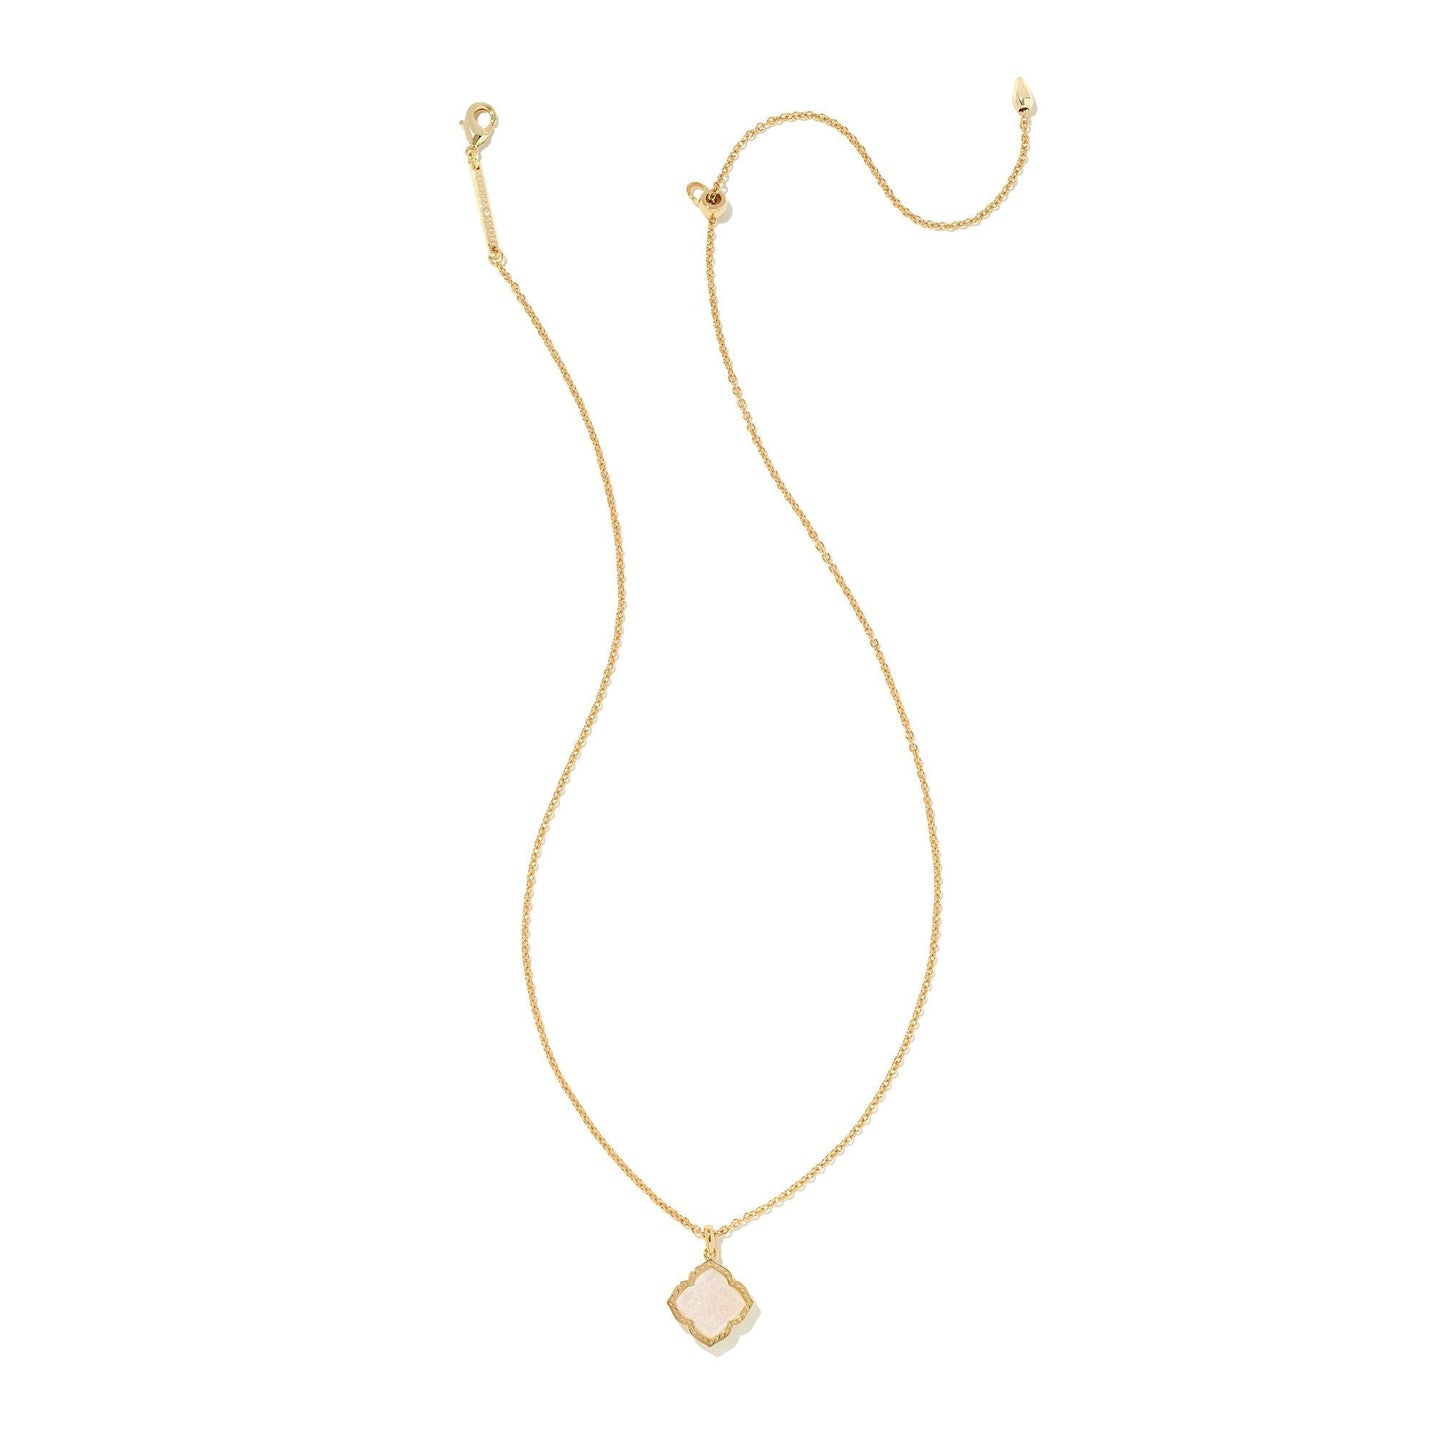 Mallory Necklace in Gold Iridescent Drusy